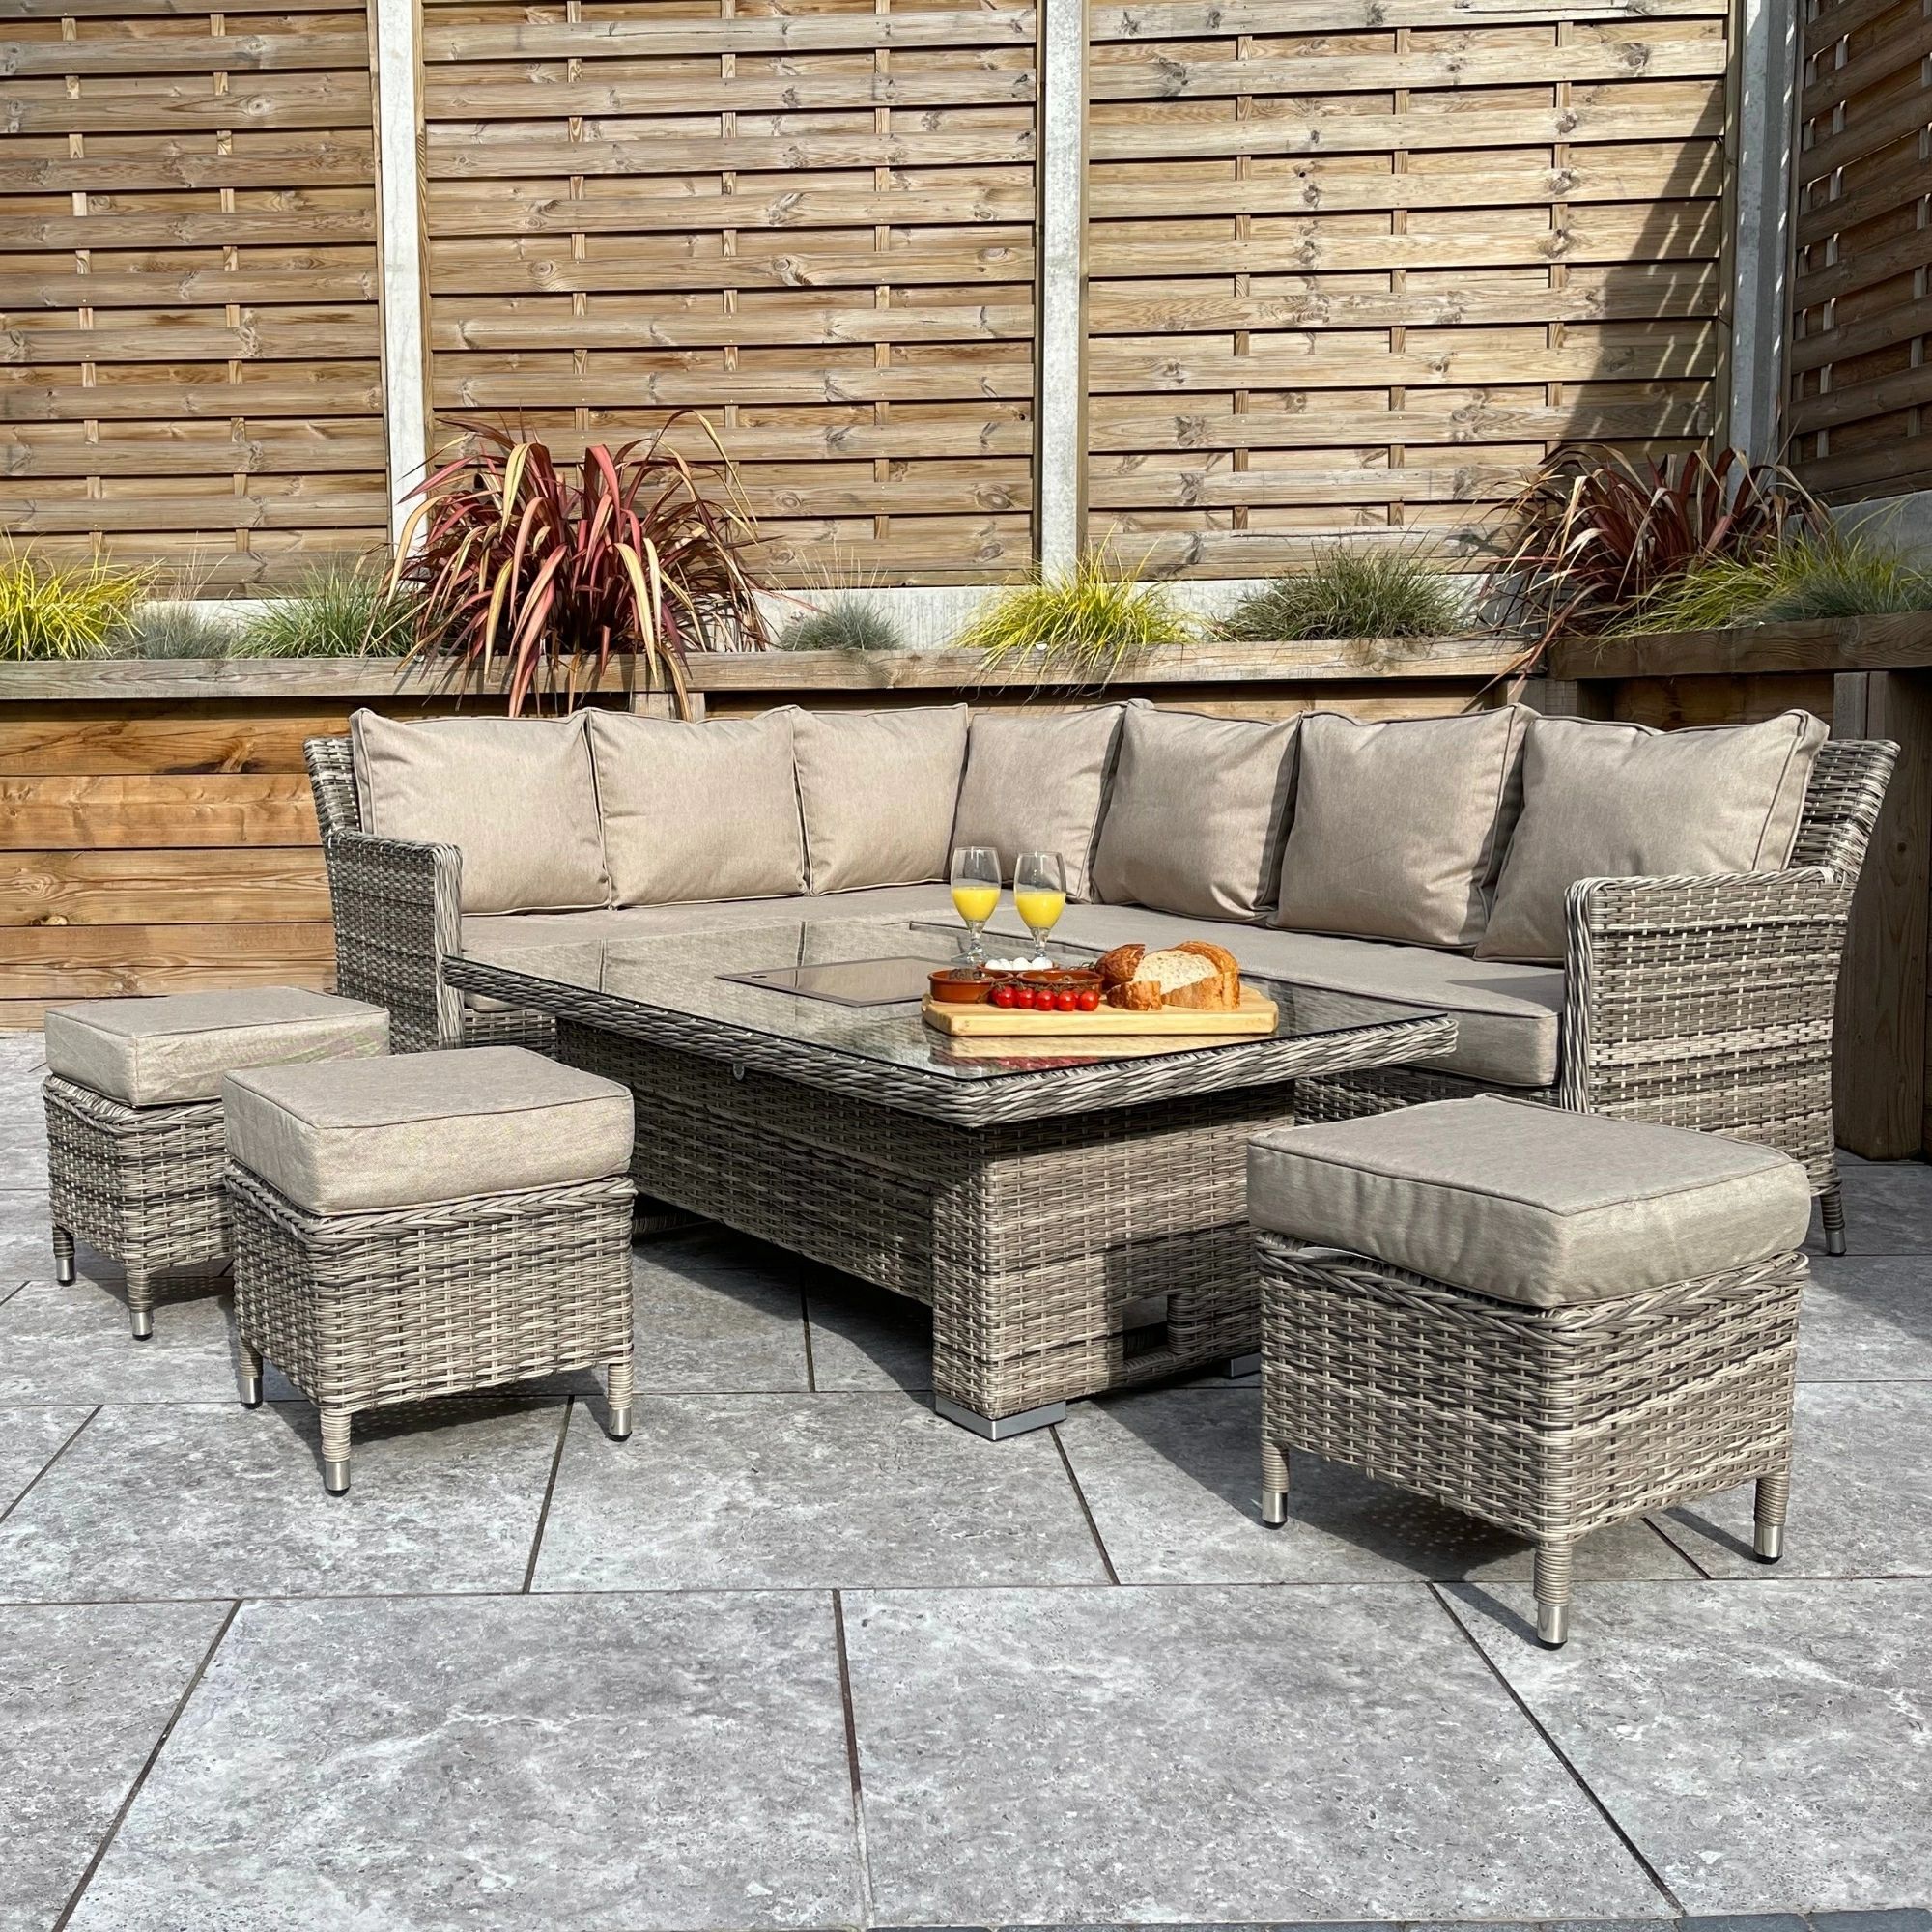 Edwina – Outdoor – Grey Double Half Round Weave – Corner Dining Sofa With  Ice Bucket Lift Table And 3 Stools – Uv Treated Wicker Within Outdoor Half Round Coffee Tables (View 15 of 15)